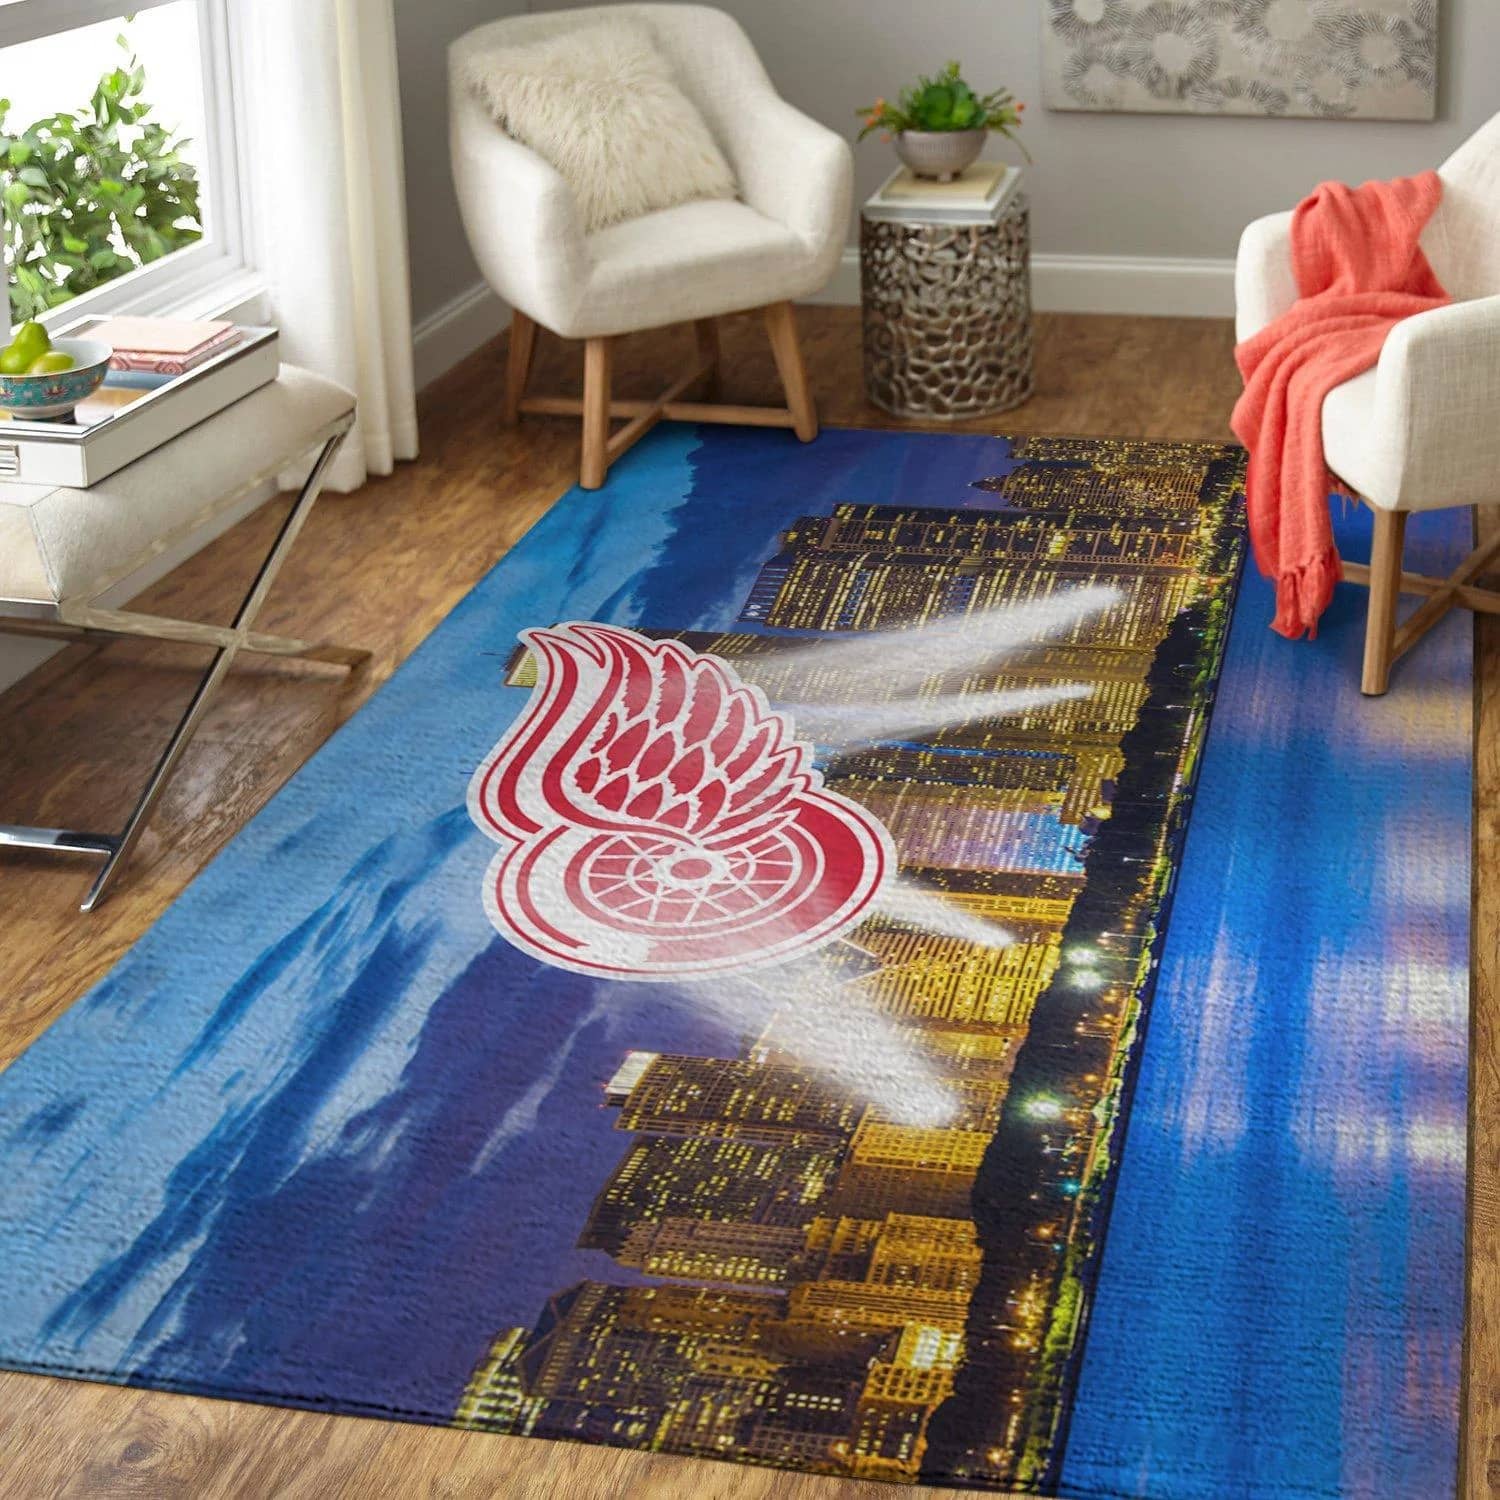 Detroit Red Wings Nhl Limited Edition Amazon Best Seller Sku 262571 Rug